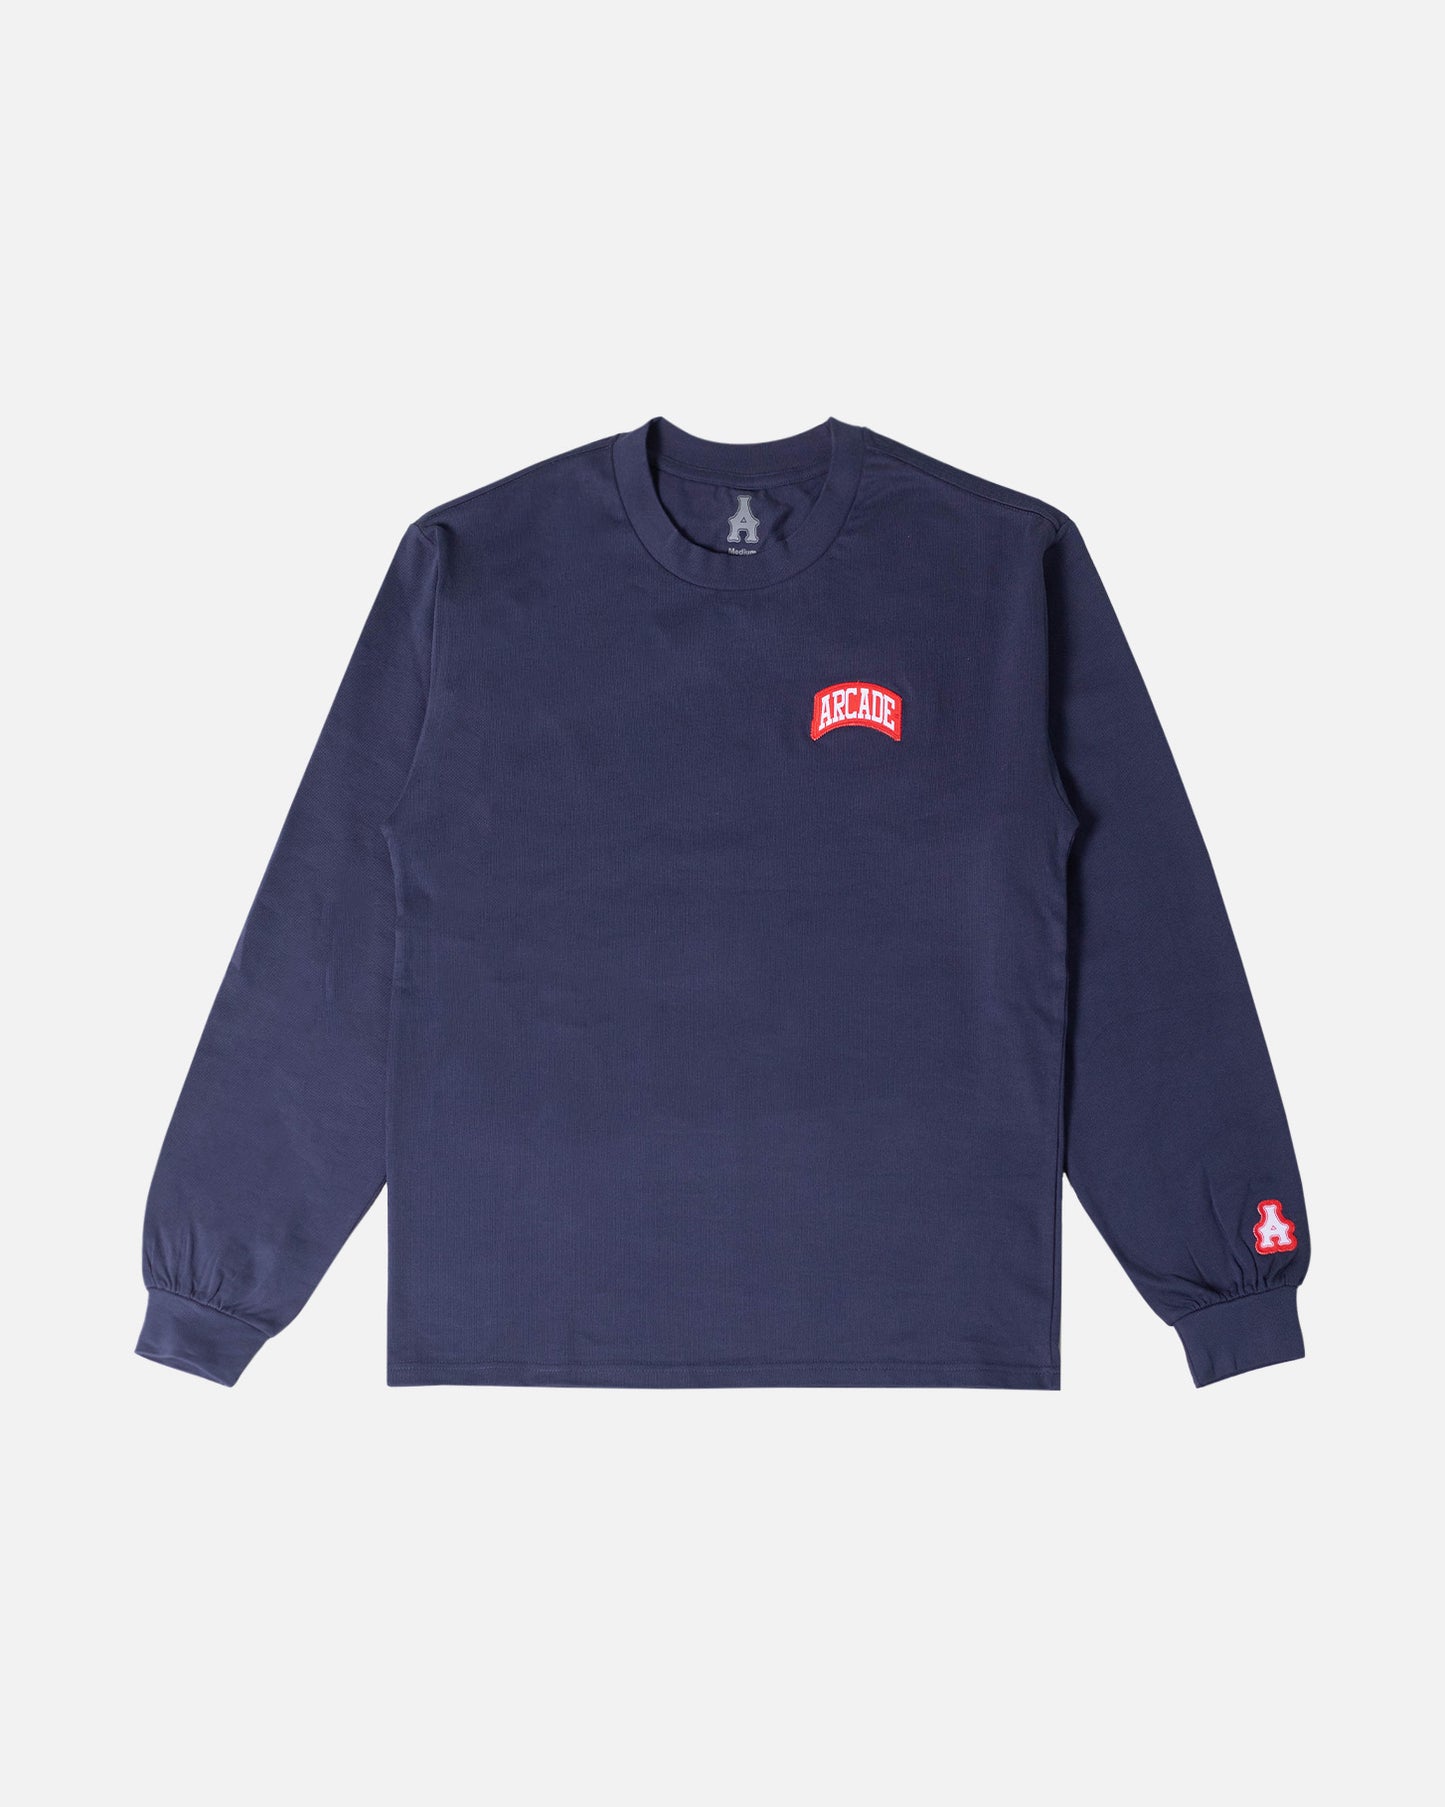 Arch Patch L/S Tee – Navy